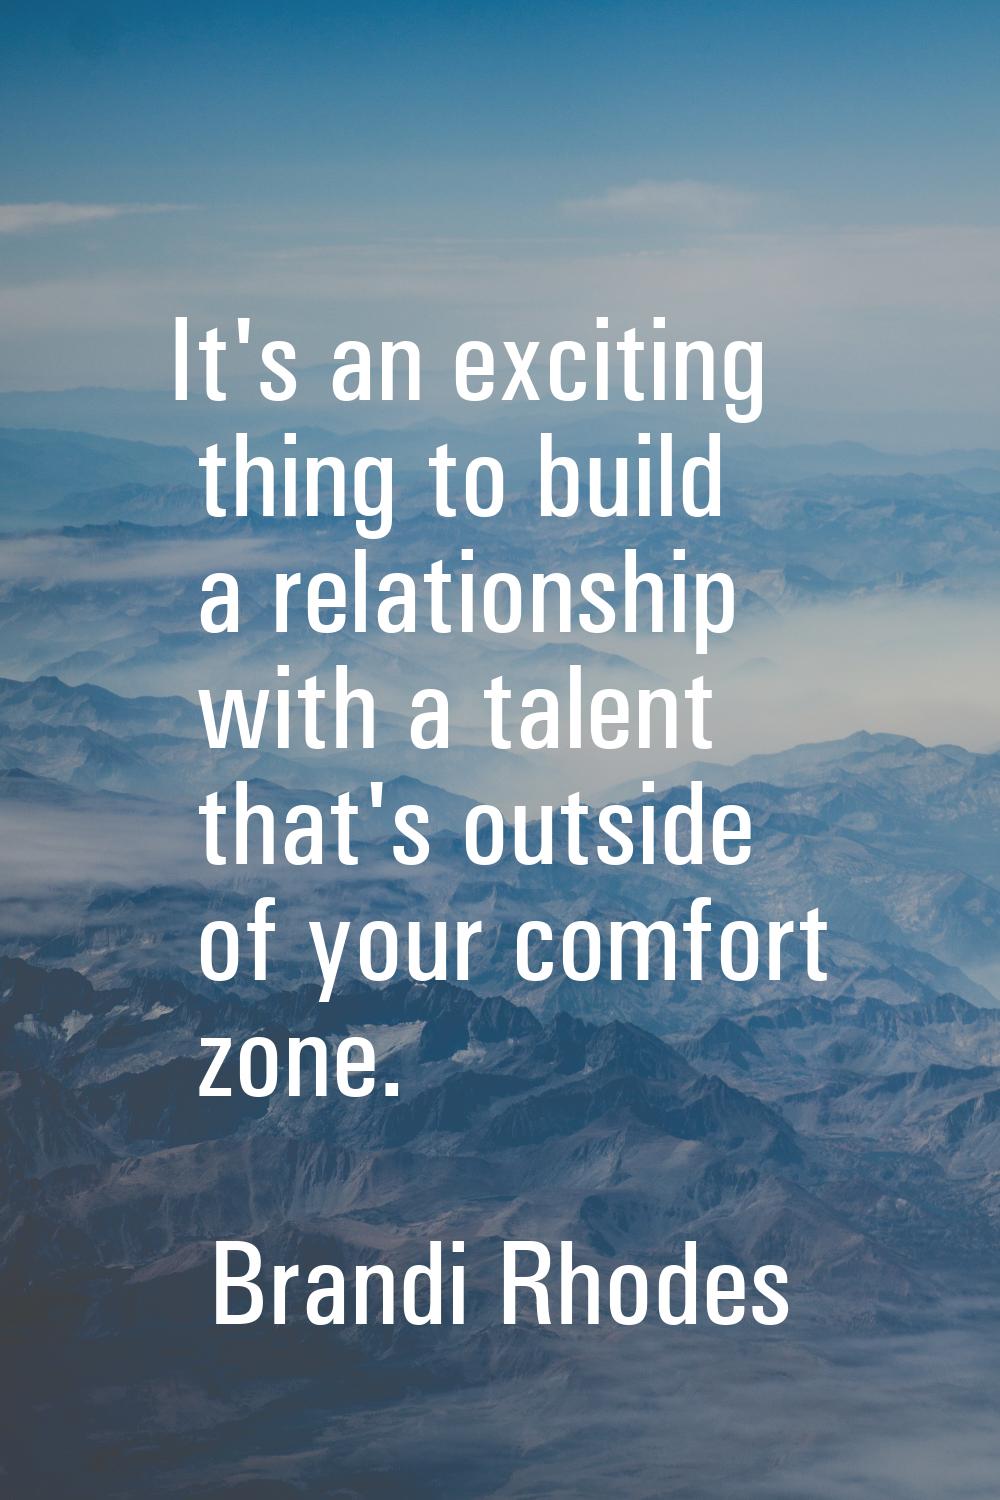 It's an exciting thing to build a relationship with a talent that's outside of your comfort zone.